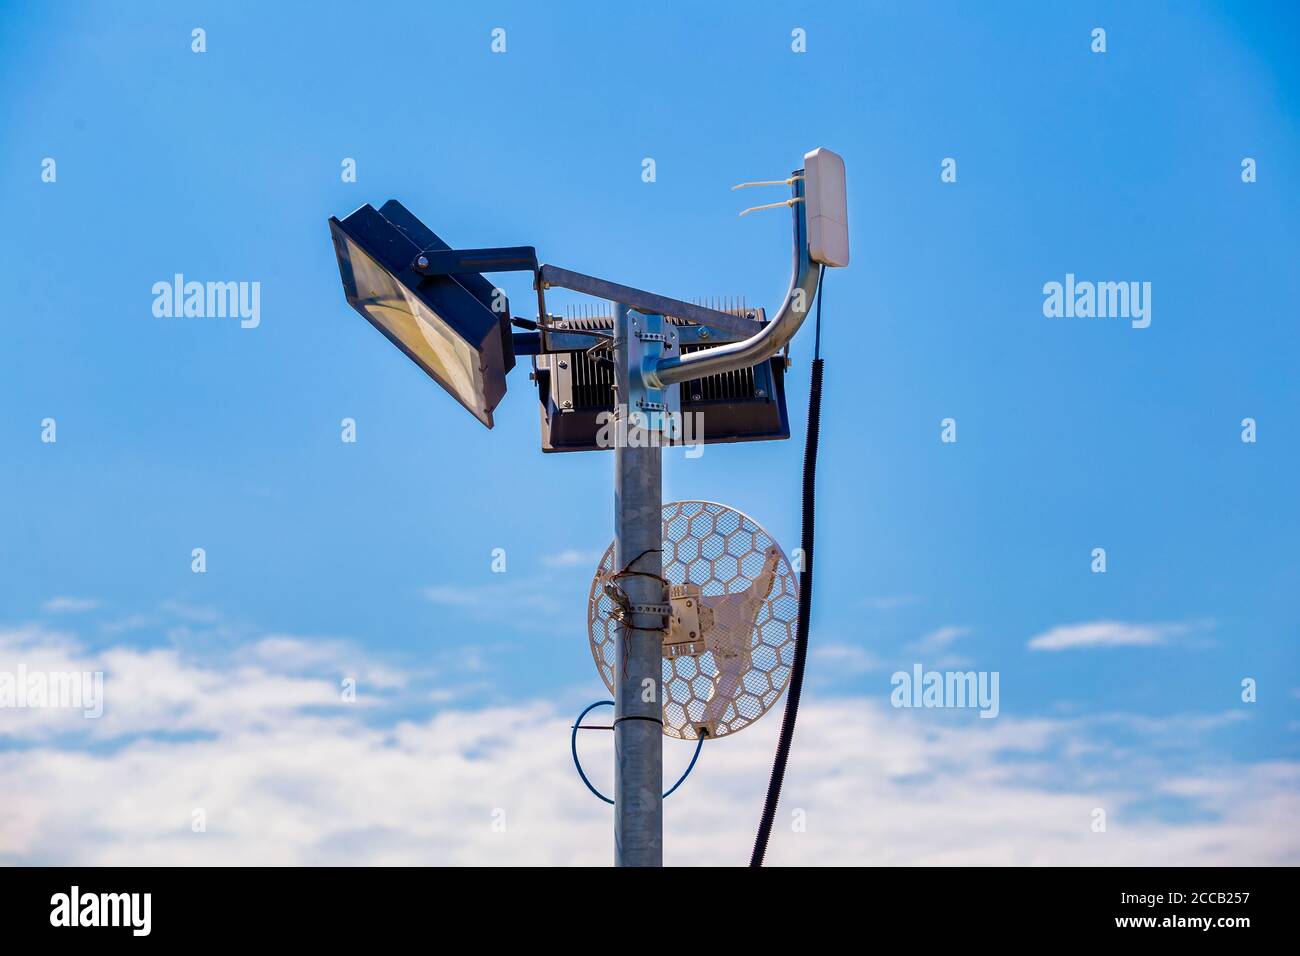 Wifi antenna on a metal light pole outdoors with blue sky background. Stock Photo